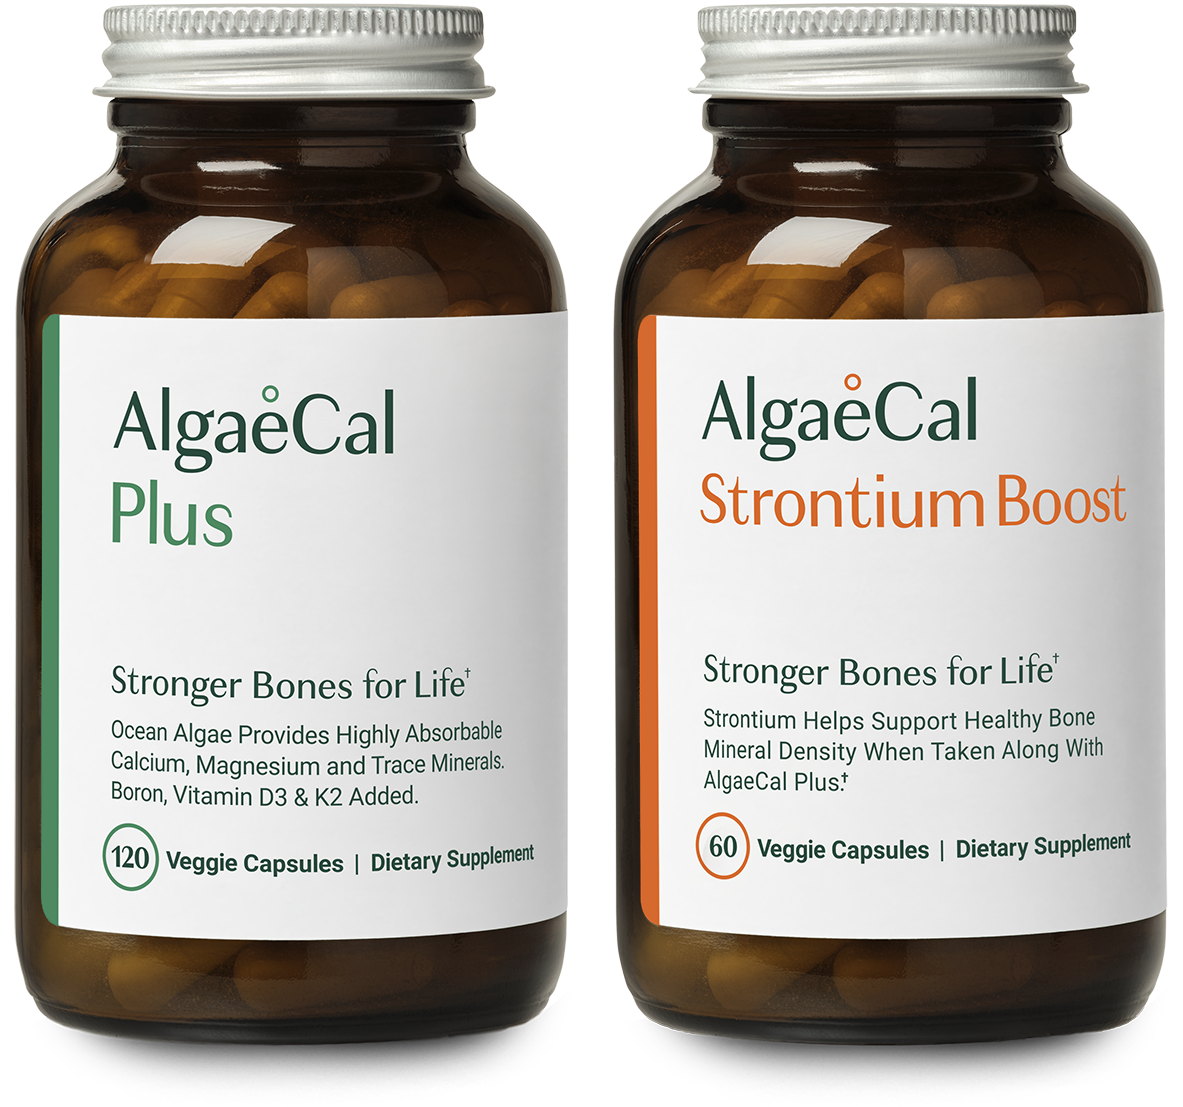 A bottle of AlgaeCal Plus and Strontium Boost